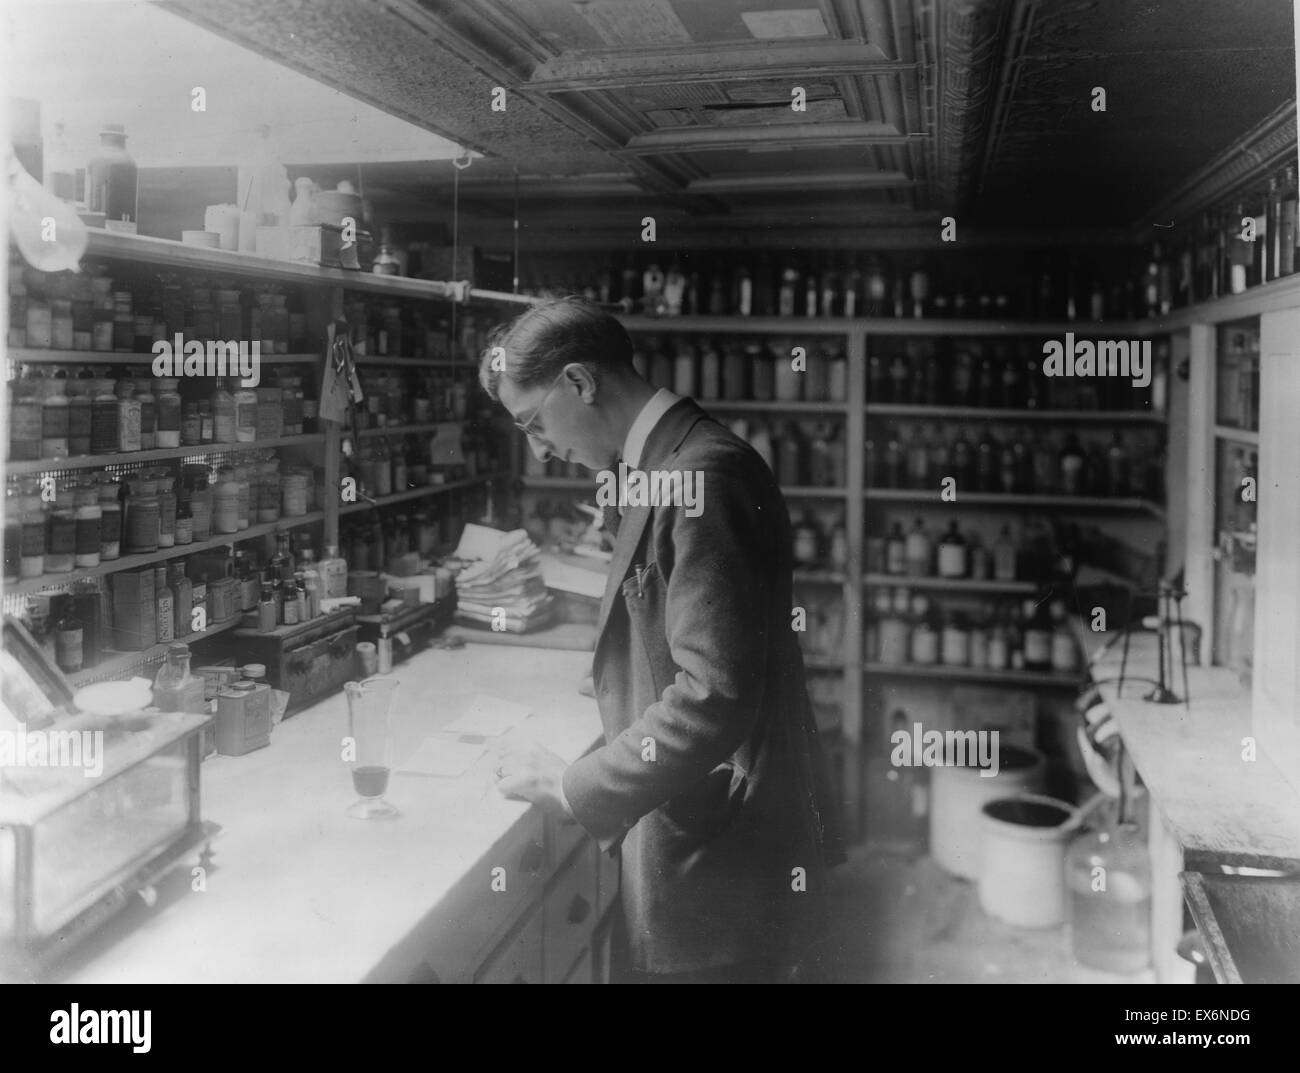 Pharmacist at People's Drug Store, 8th and H Streets, N.E., Washington, D.C., looking at prescriptions on the counter, in room lined with shelves of pharmacy bottles 1920 Stock Photo